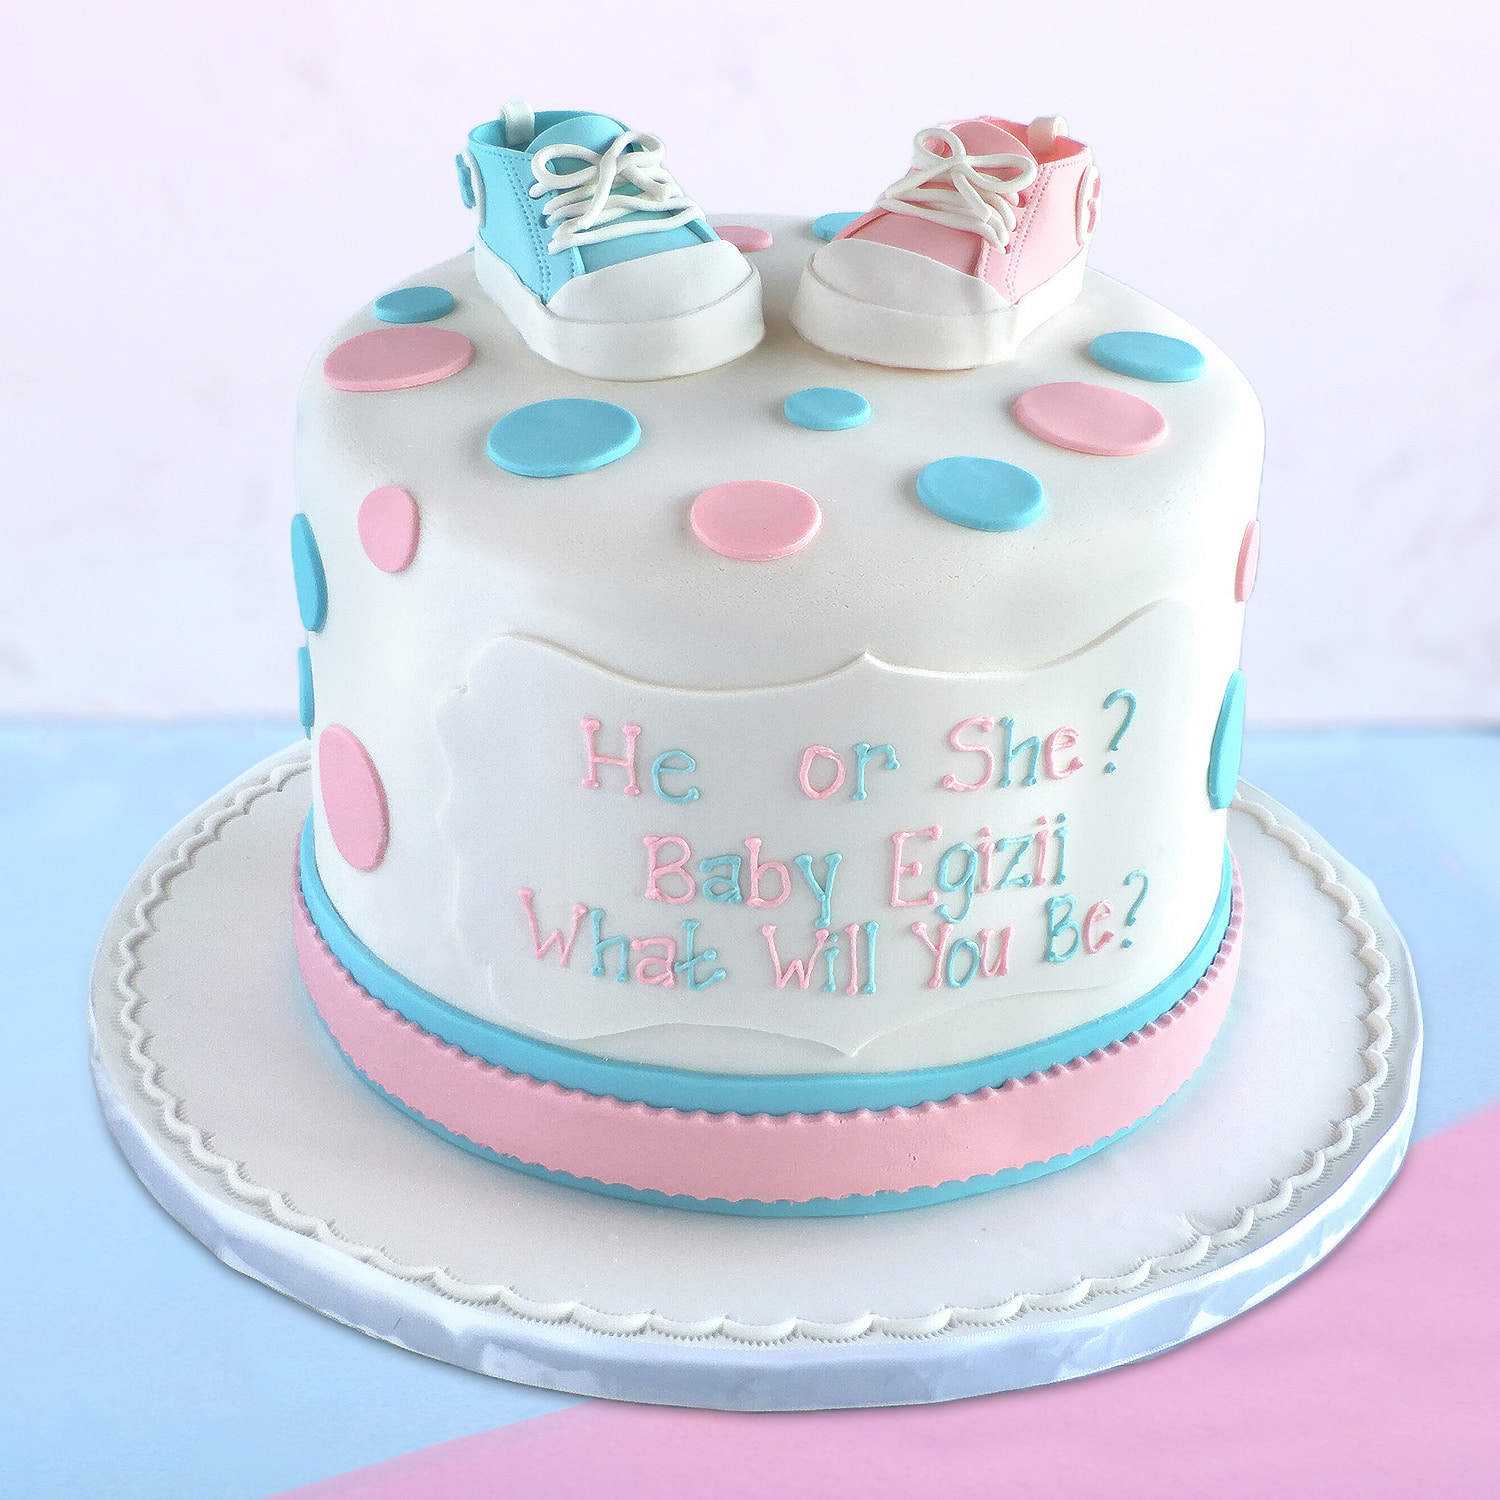 Baby Shower Cake Photos - Christine's Cakes and Pastries